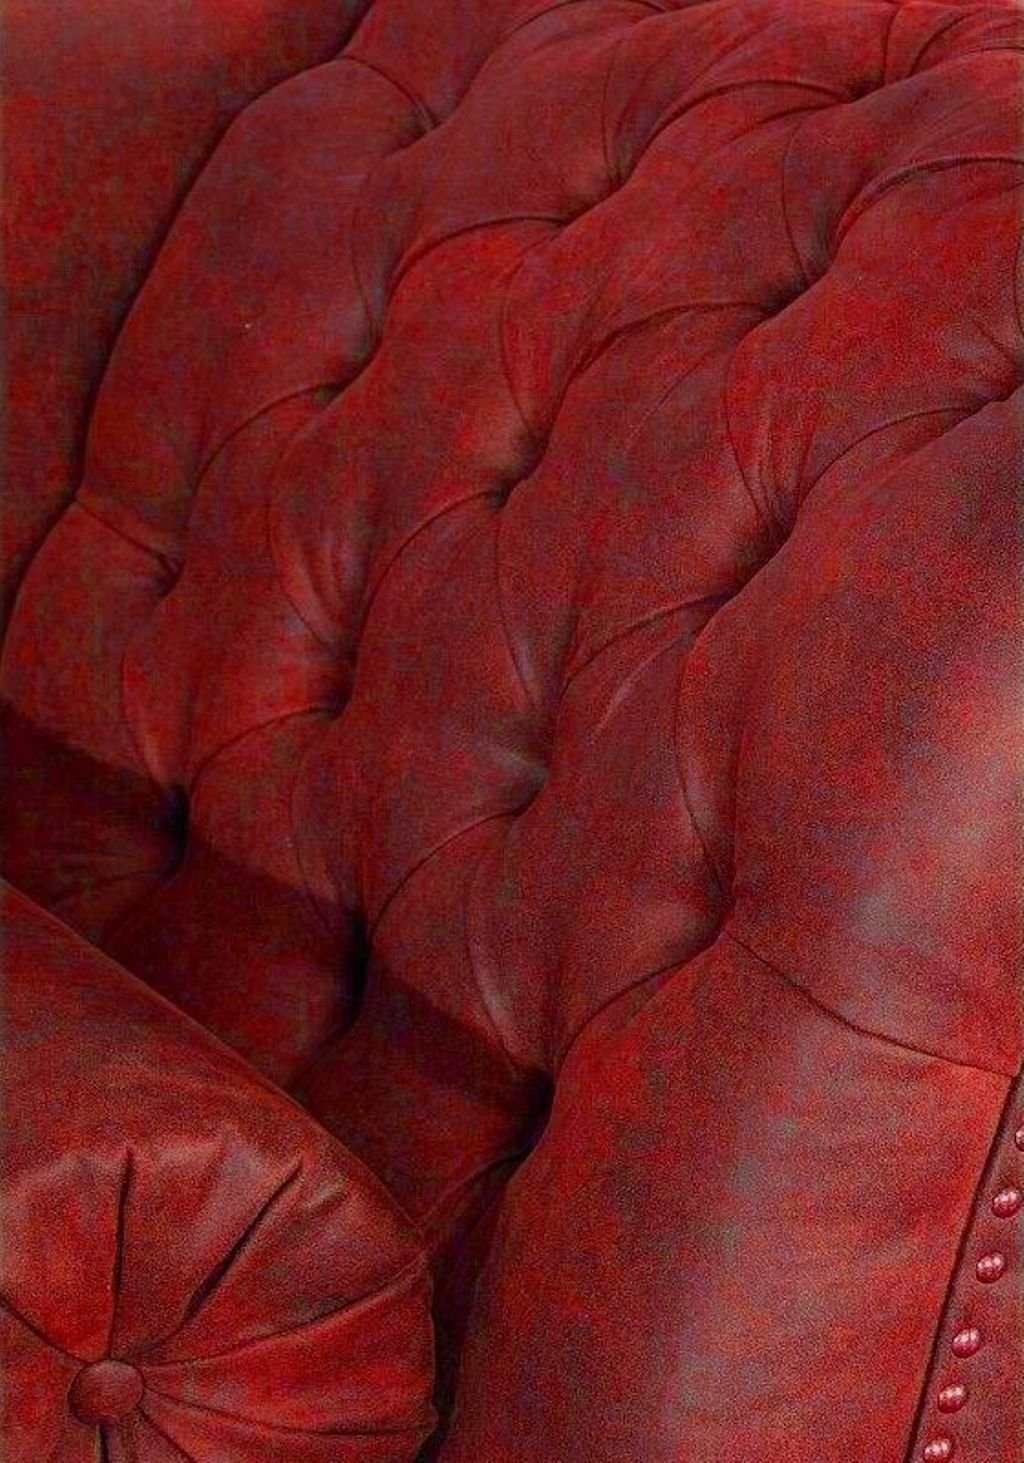 JVmoebel Chaiselongue Chaiselongues SOFORT, Teile, Chaise Rot in Europa Chesterfield 1 Relax Made Textil Liege Sofa